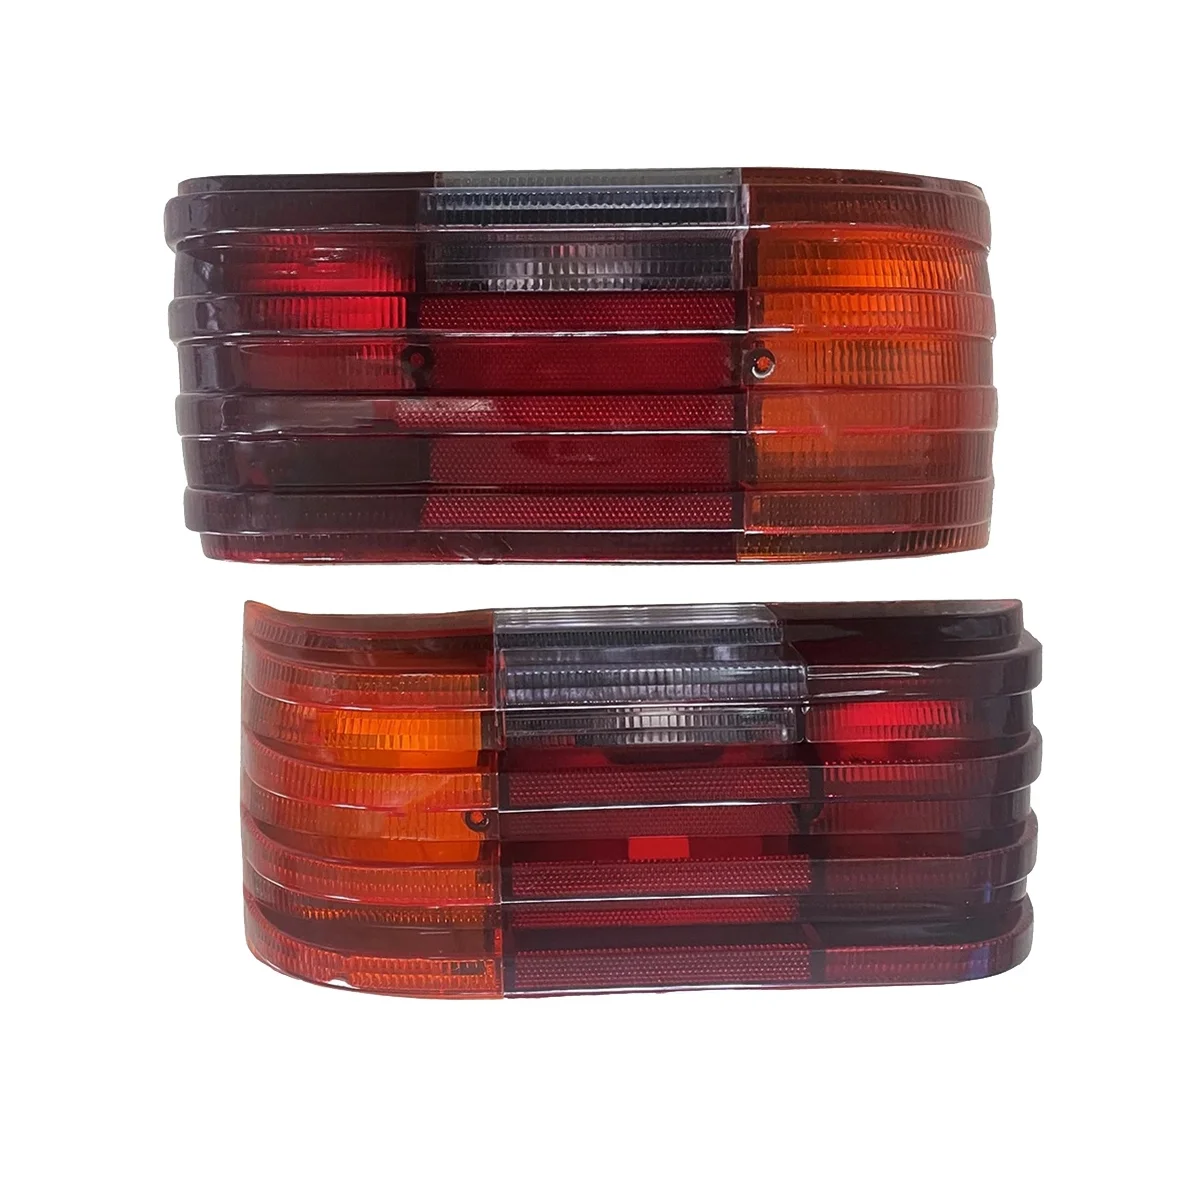 

1Pair Rear Tail Light Stop Brake Lamp for Mercedes Benz W115 1976-1984 Car Reverse Signal Turn Lighting Without Bulb